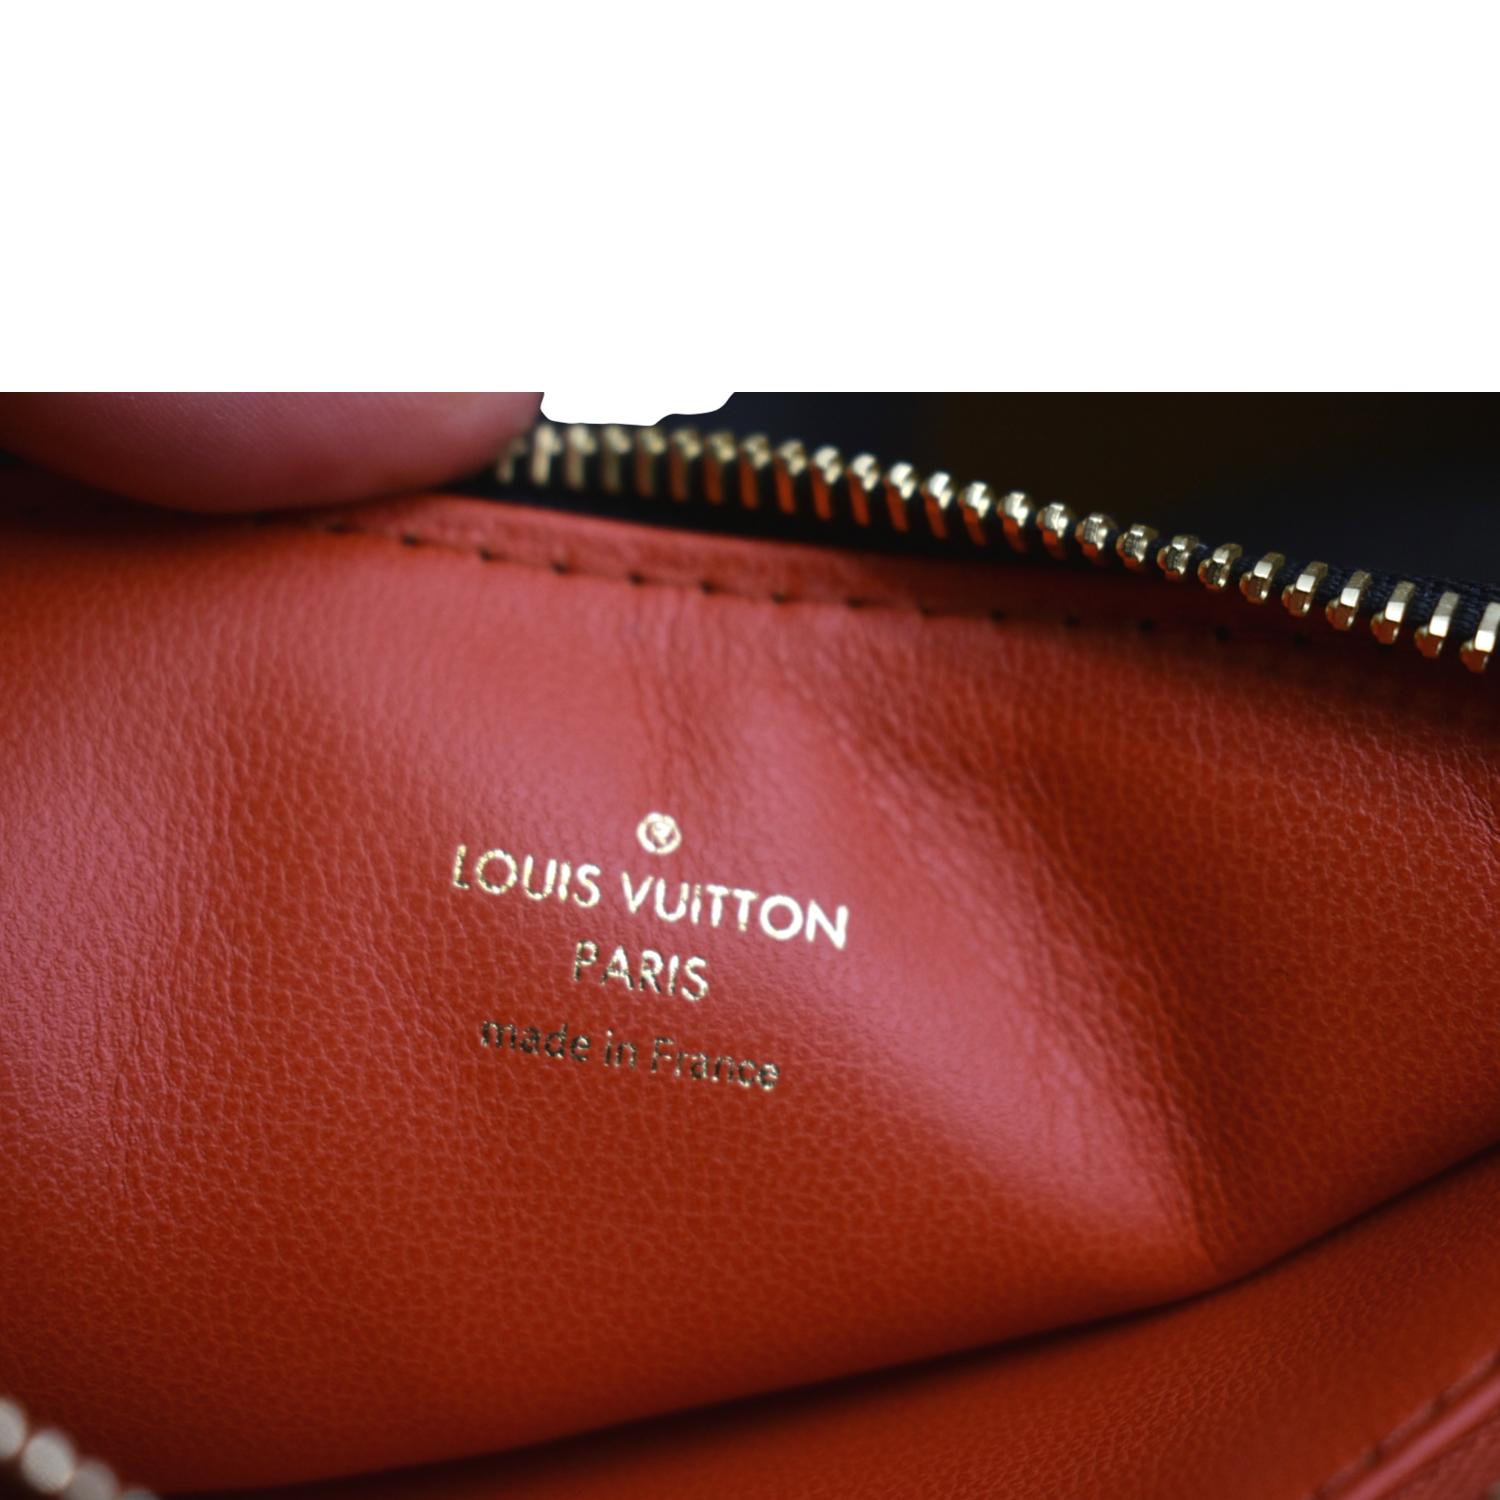 LOUIS VUITTON COUSSIN BB FIRST IMPRESSIONS! 